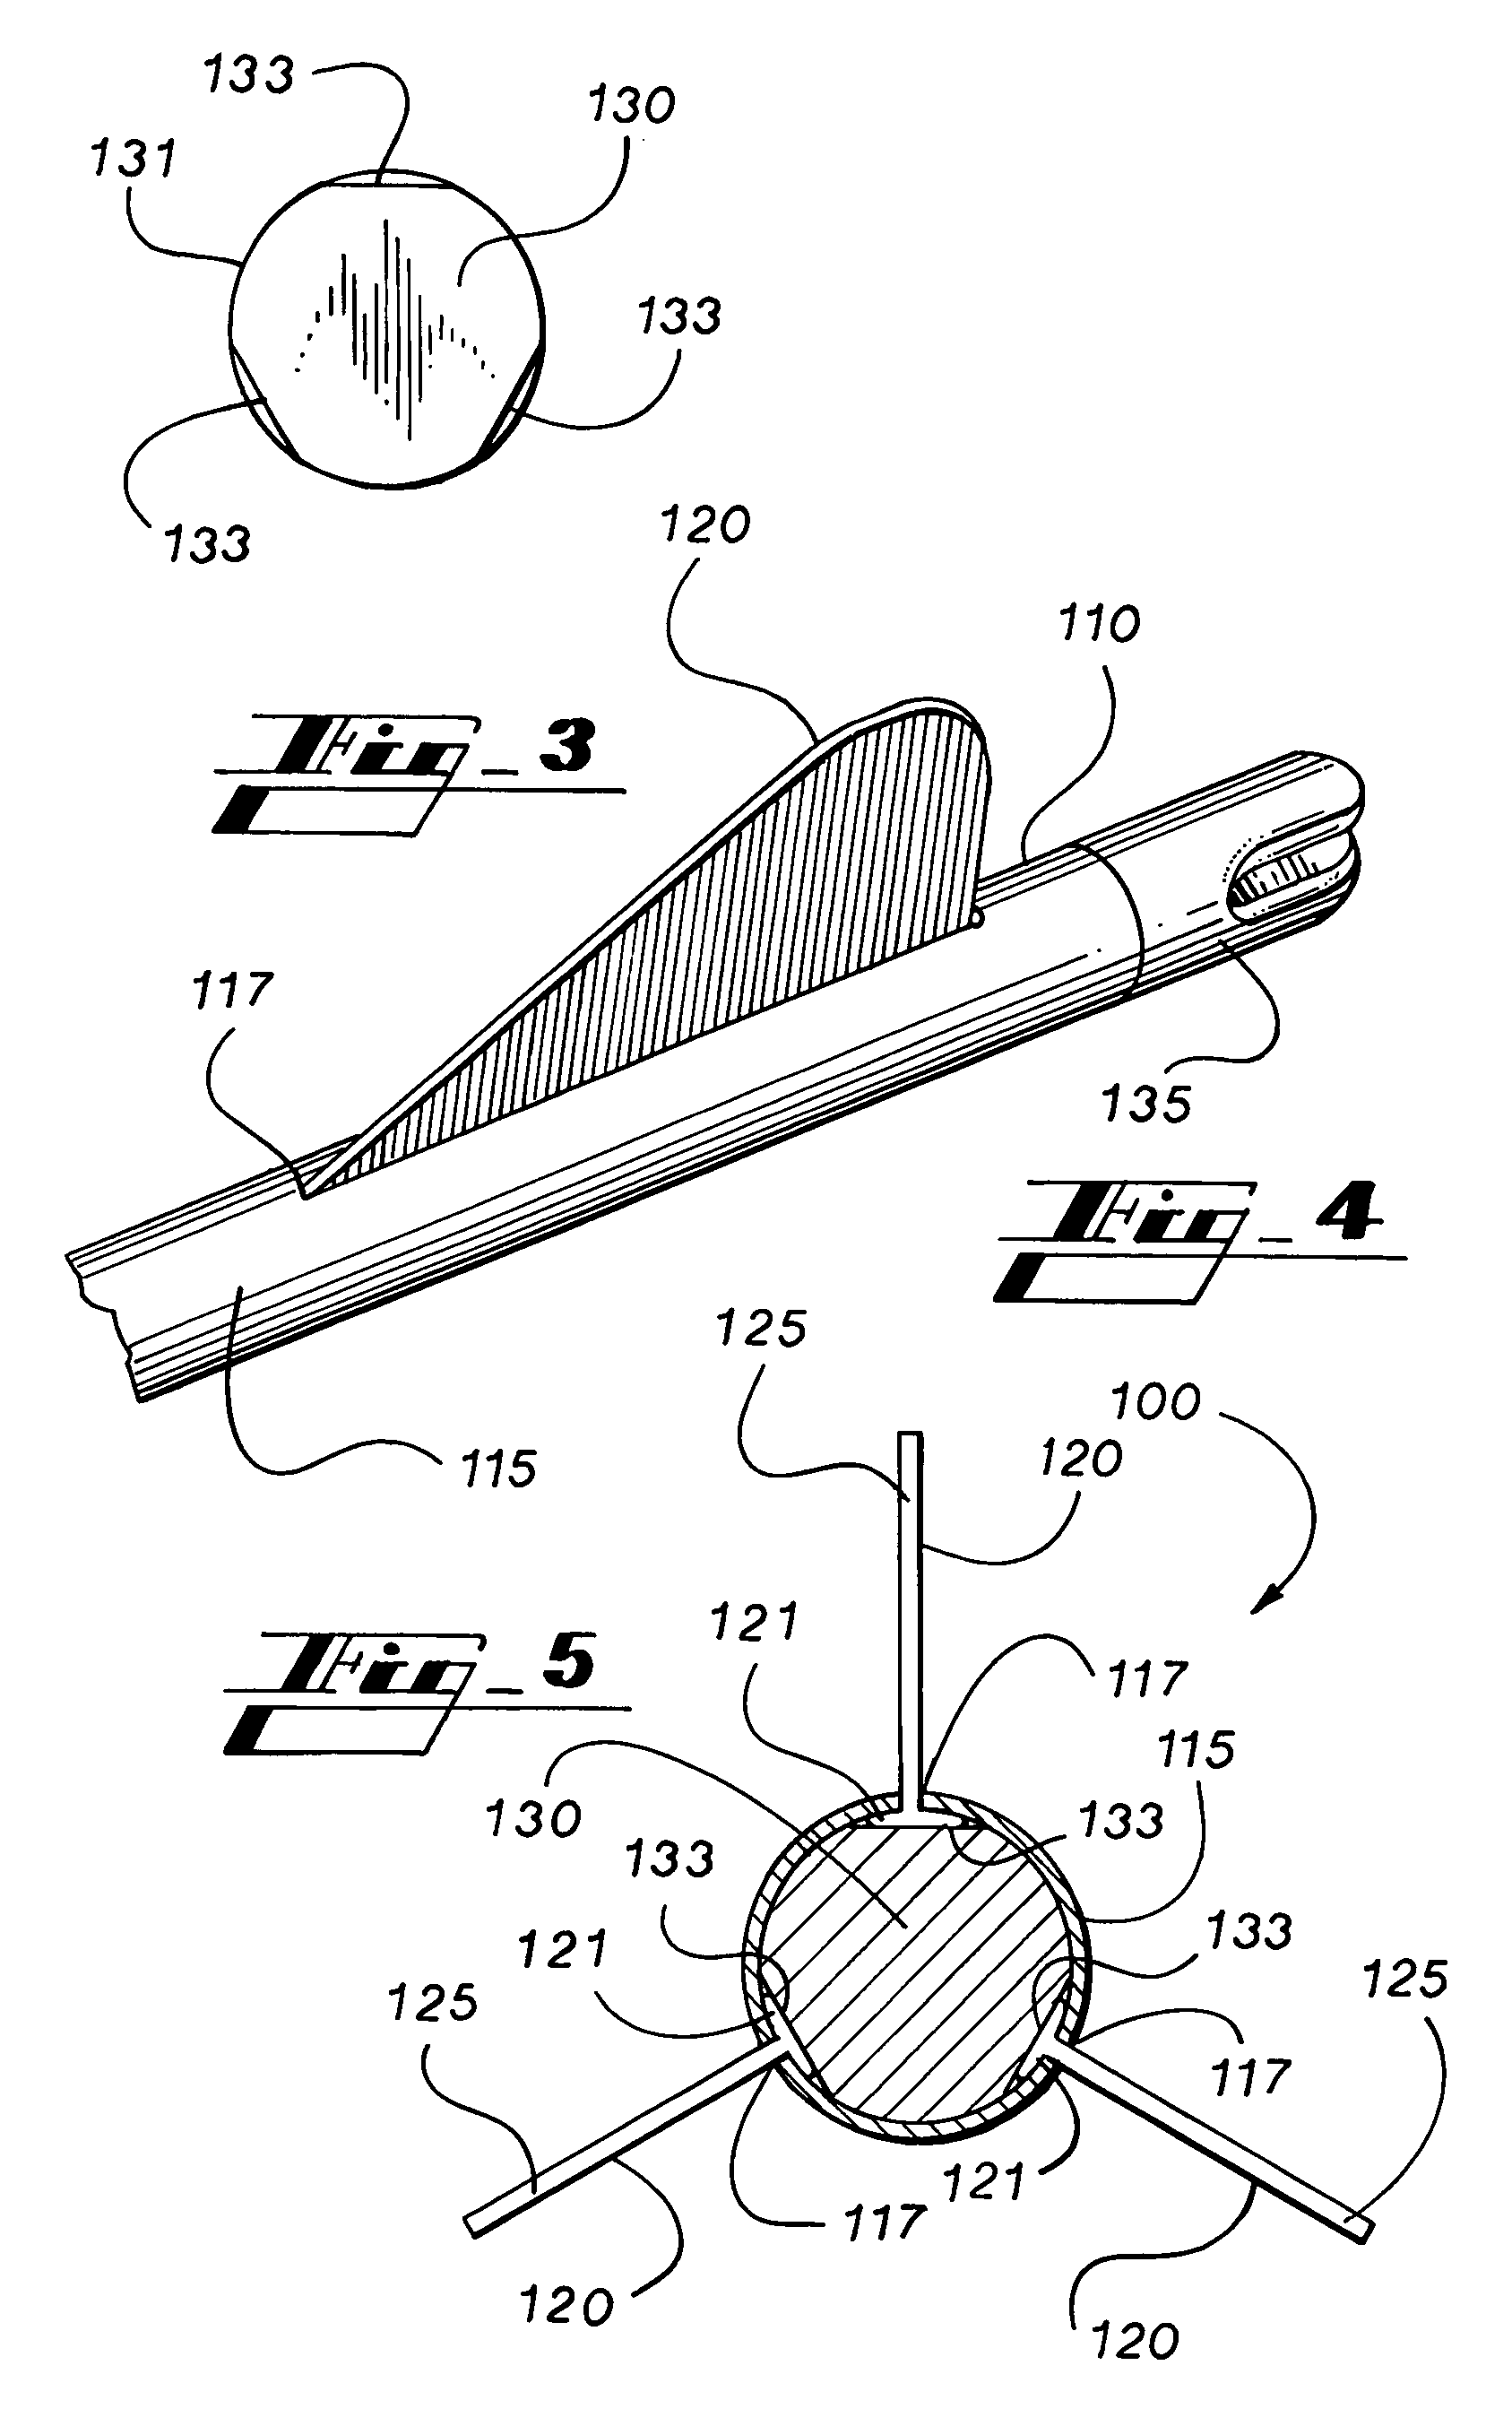 Fletching system and method therefor